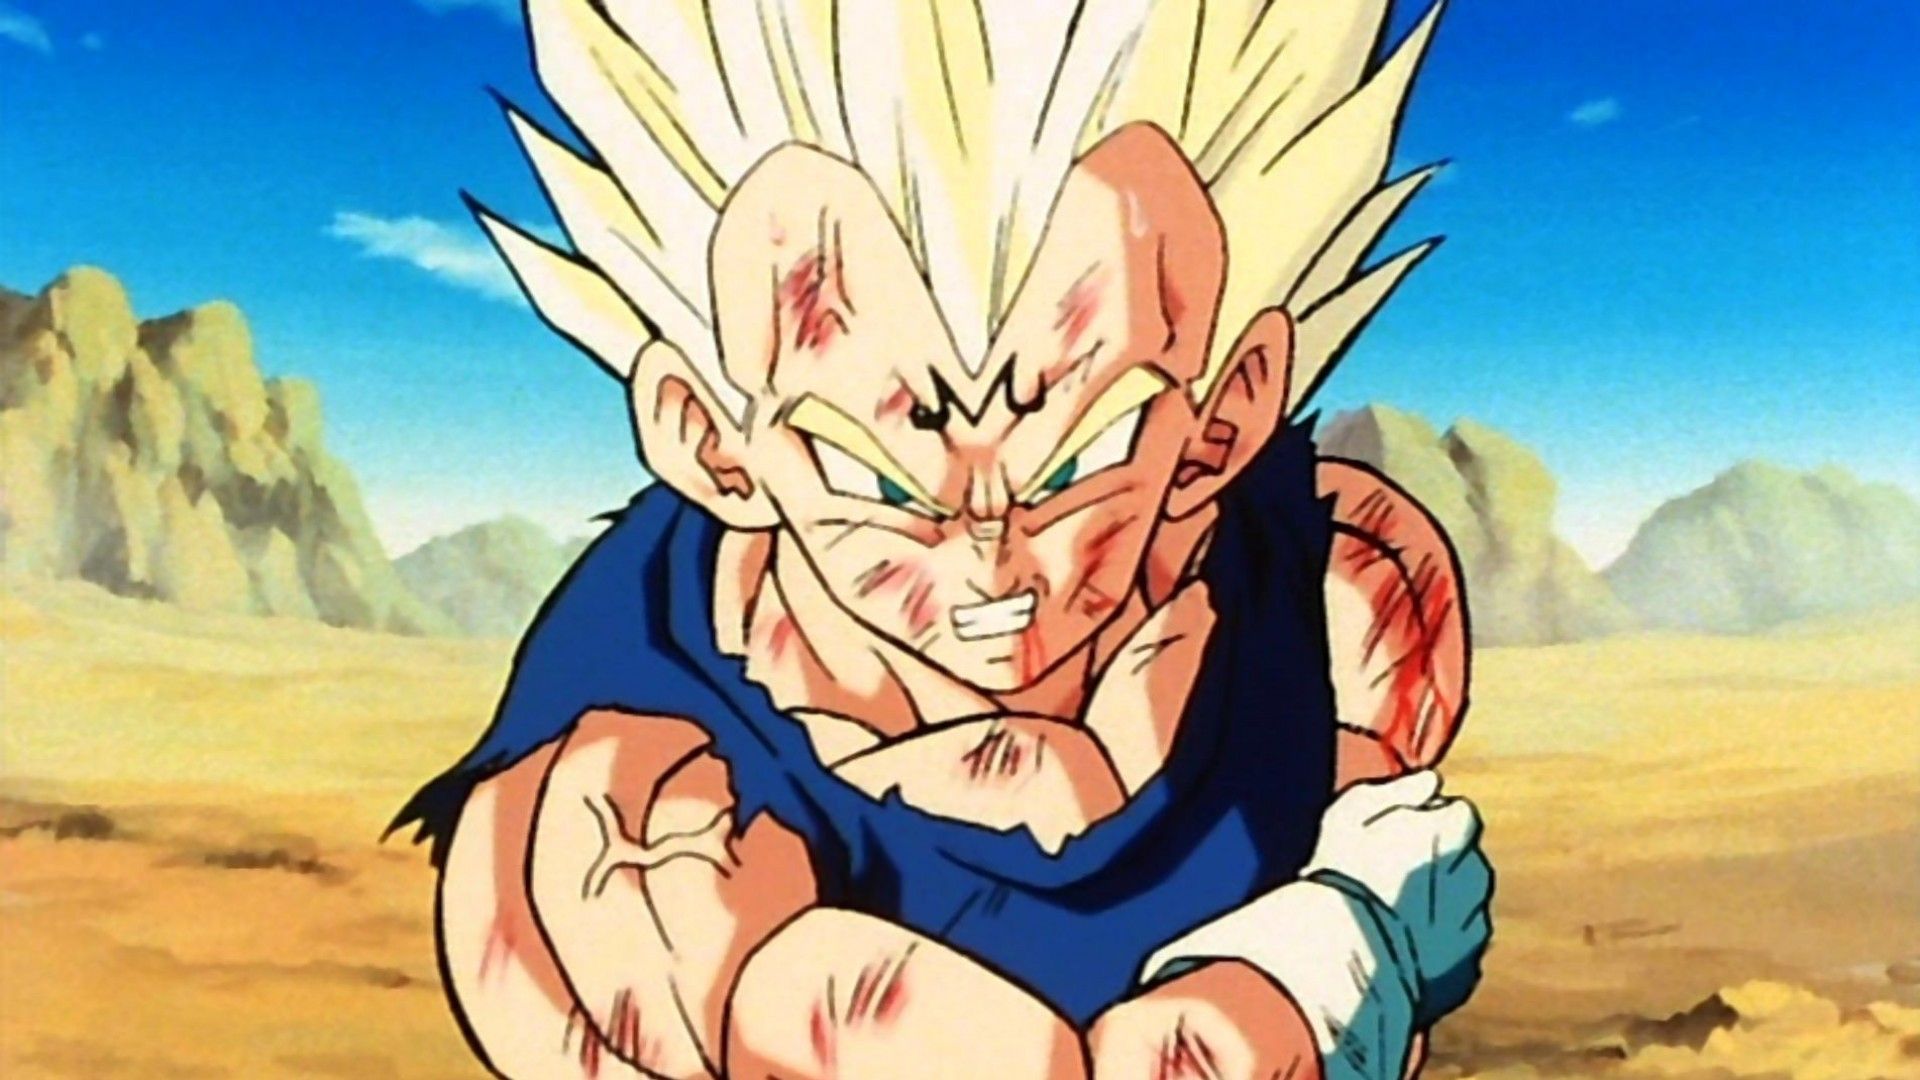 Vegeta HD Wallpapers And Photos download